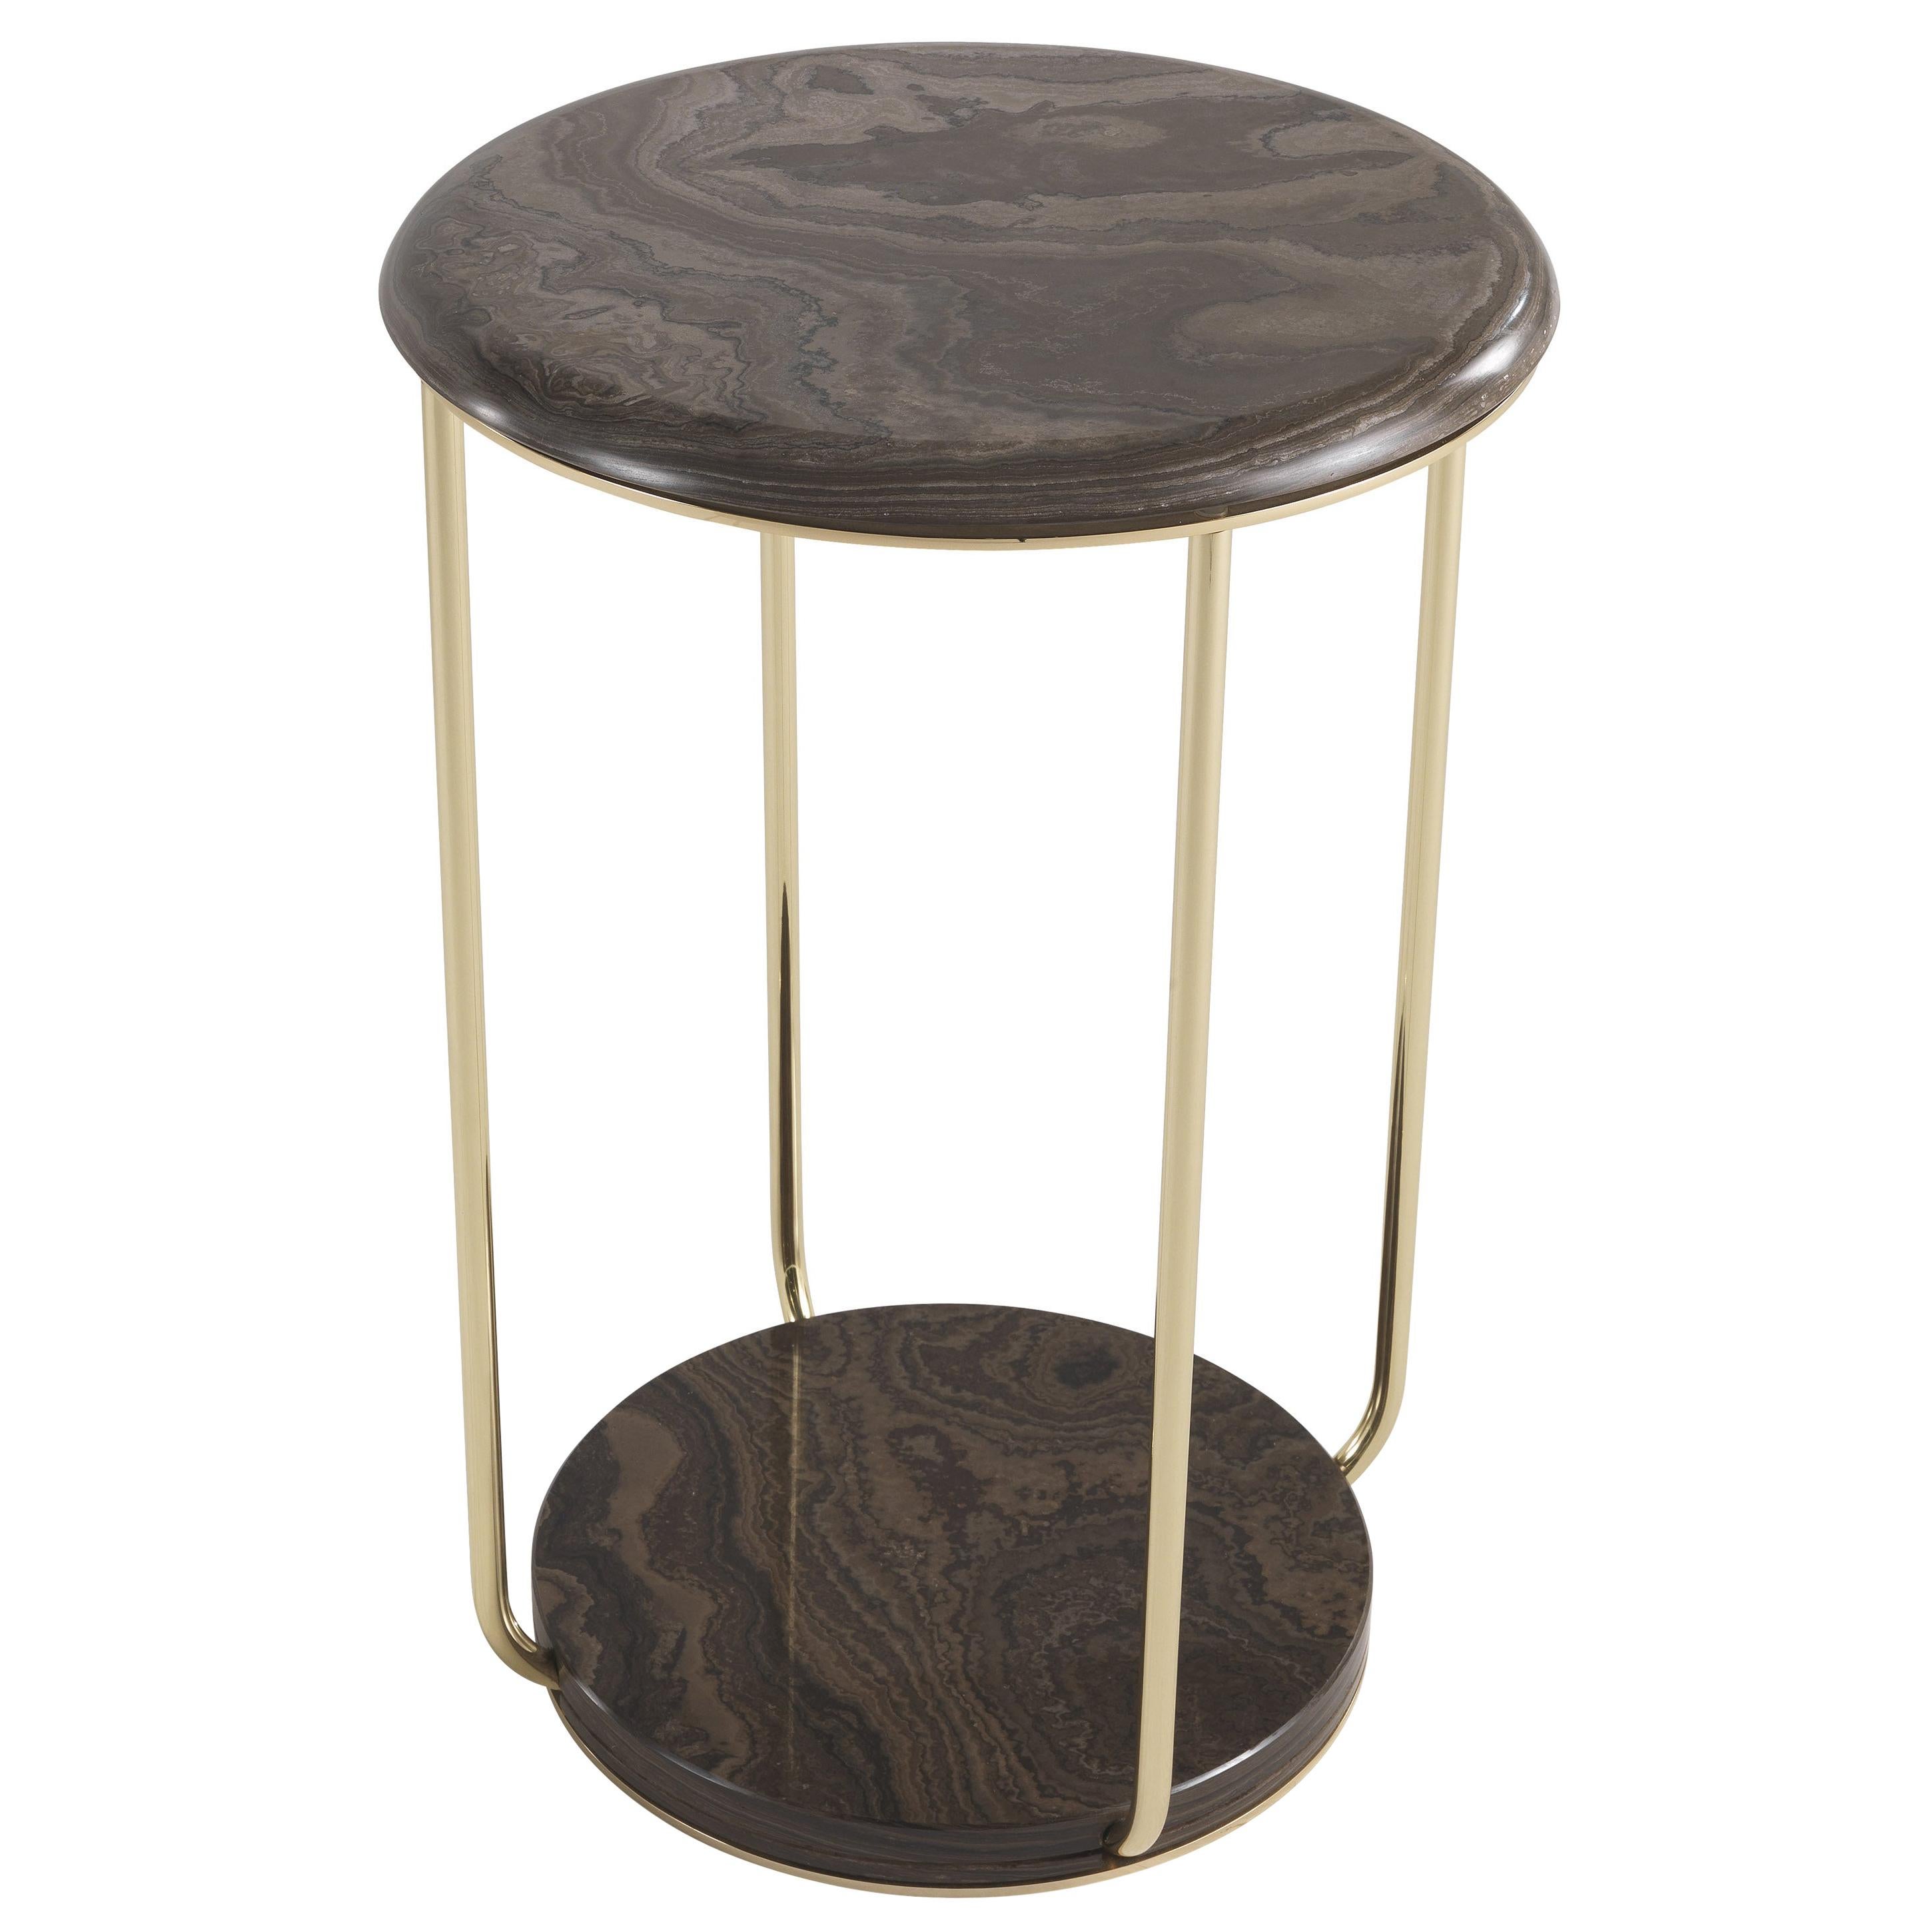 21st Century Ambar Small Table in Dark Marble and Brass by Etro Home Interiors